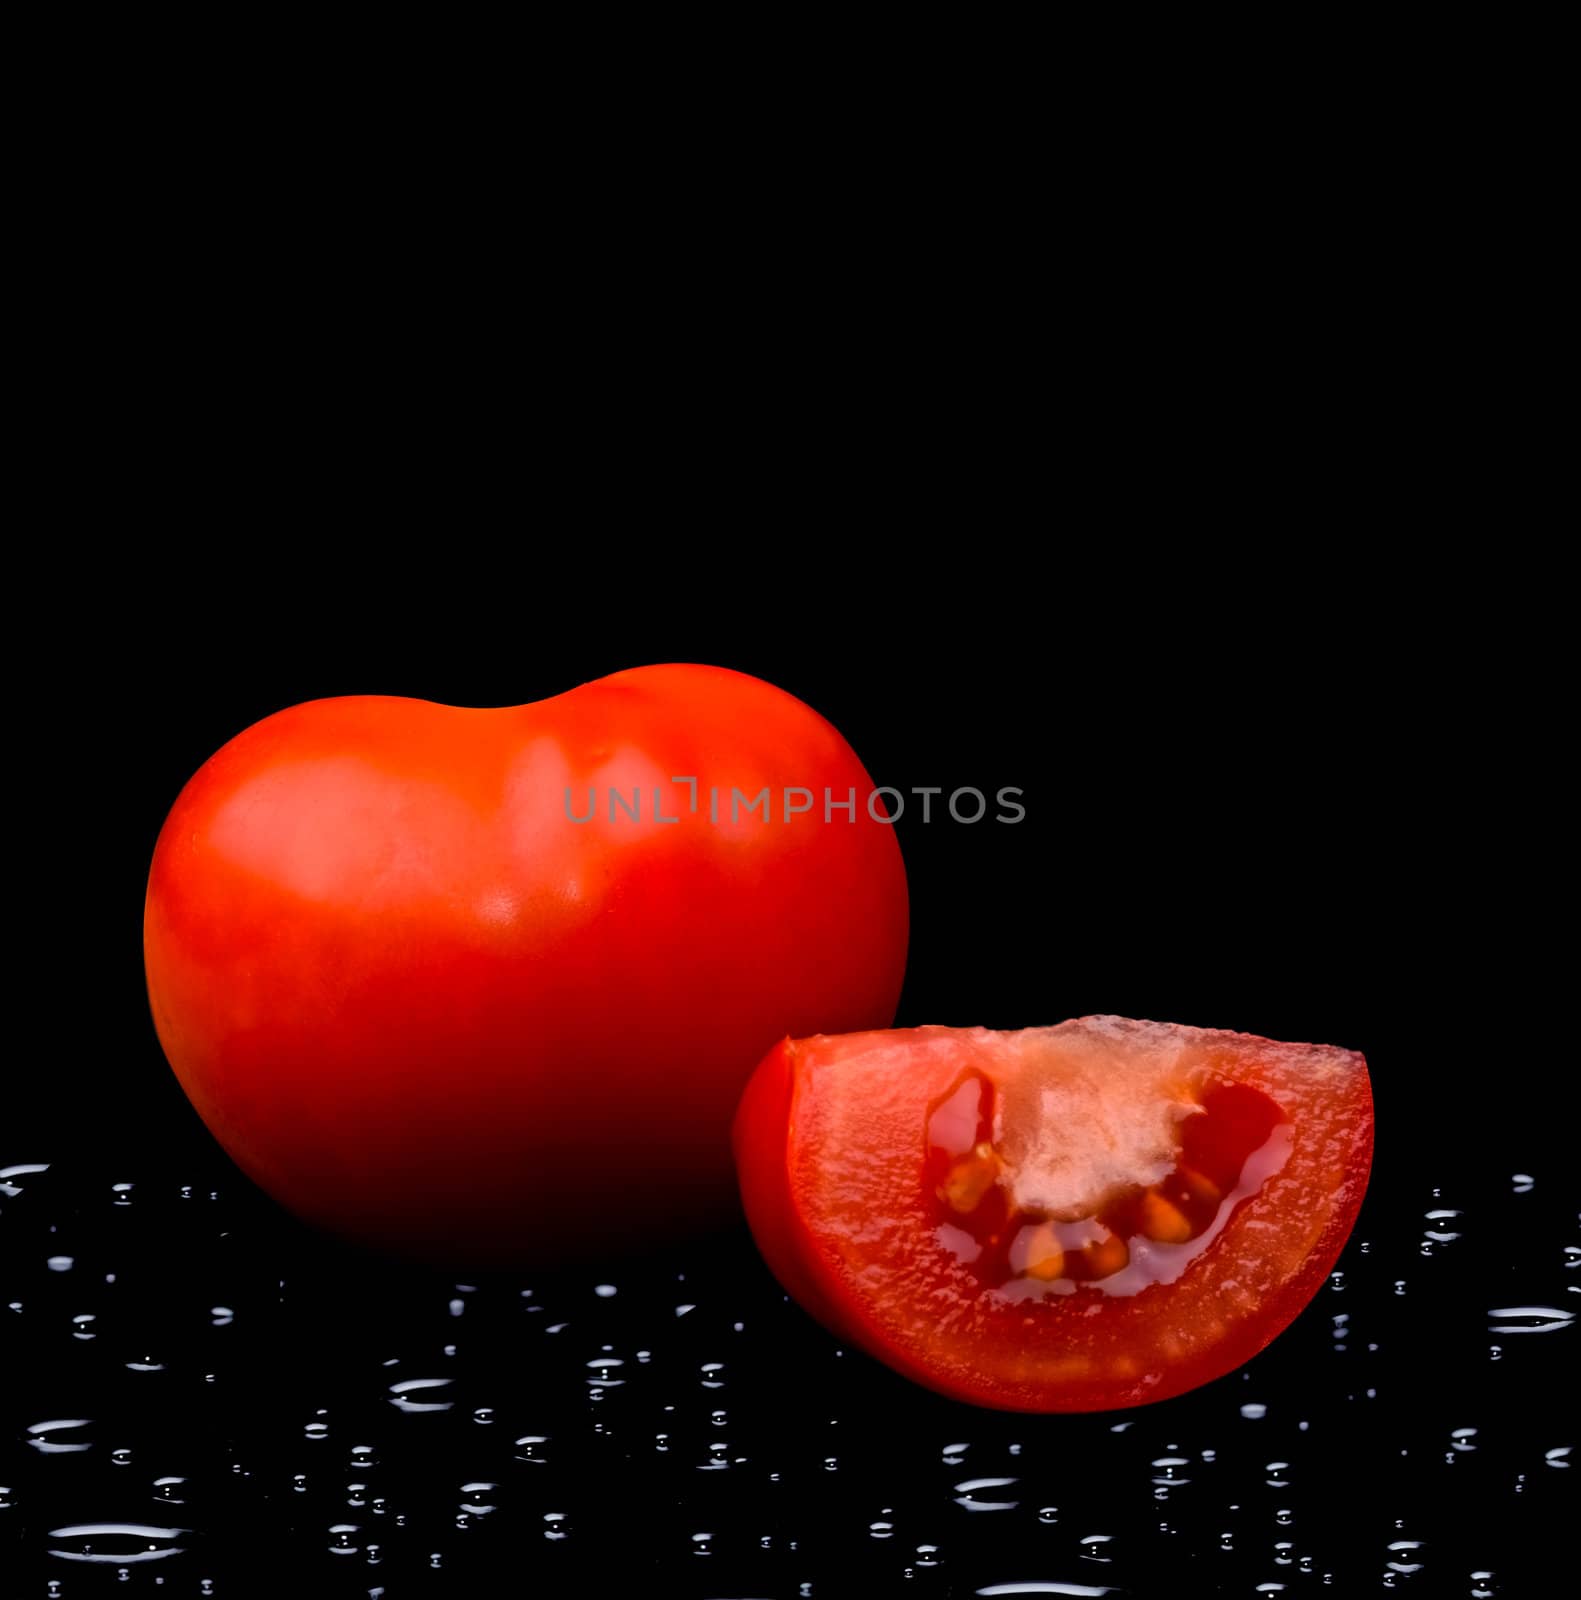 Tomato with water drops on black background by vician